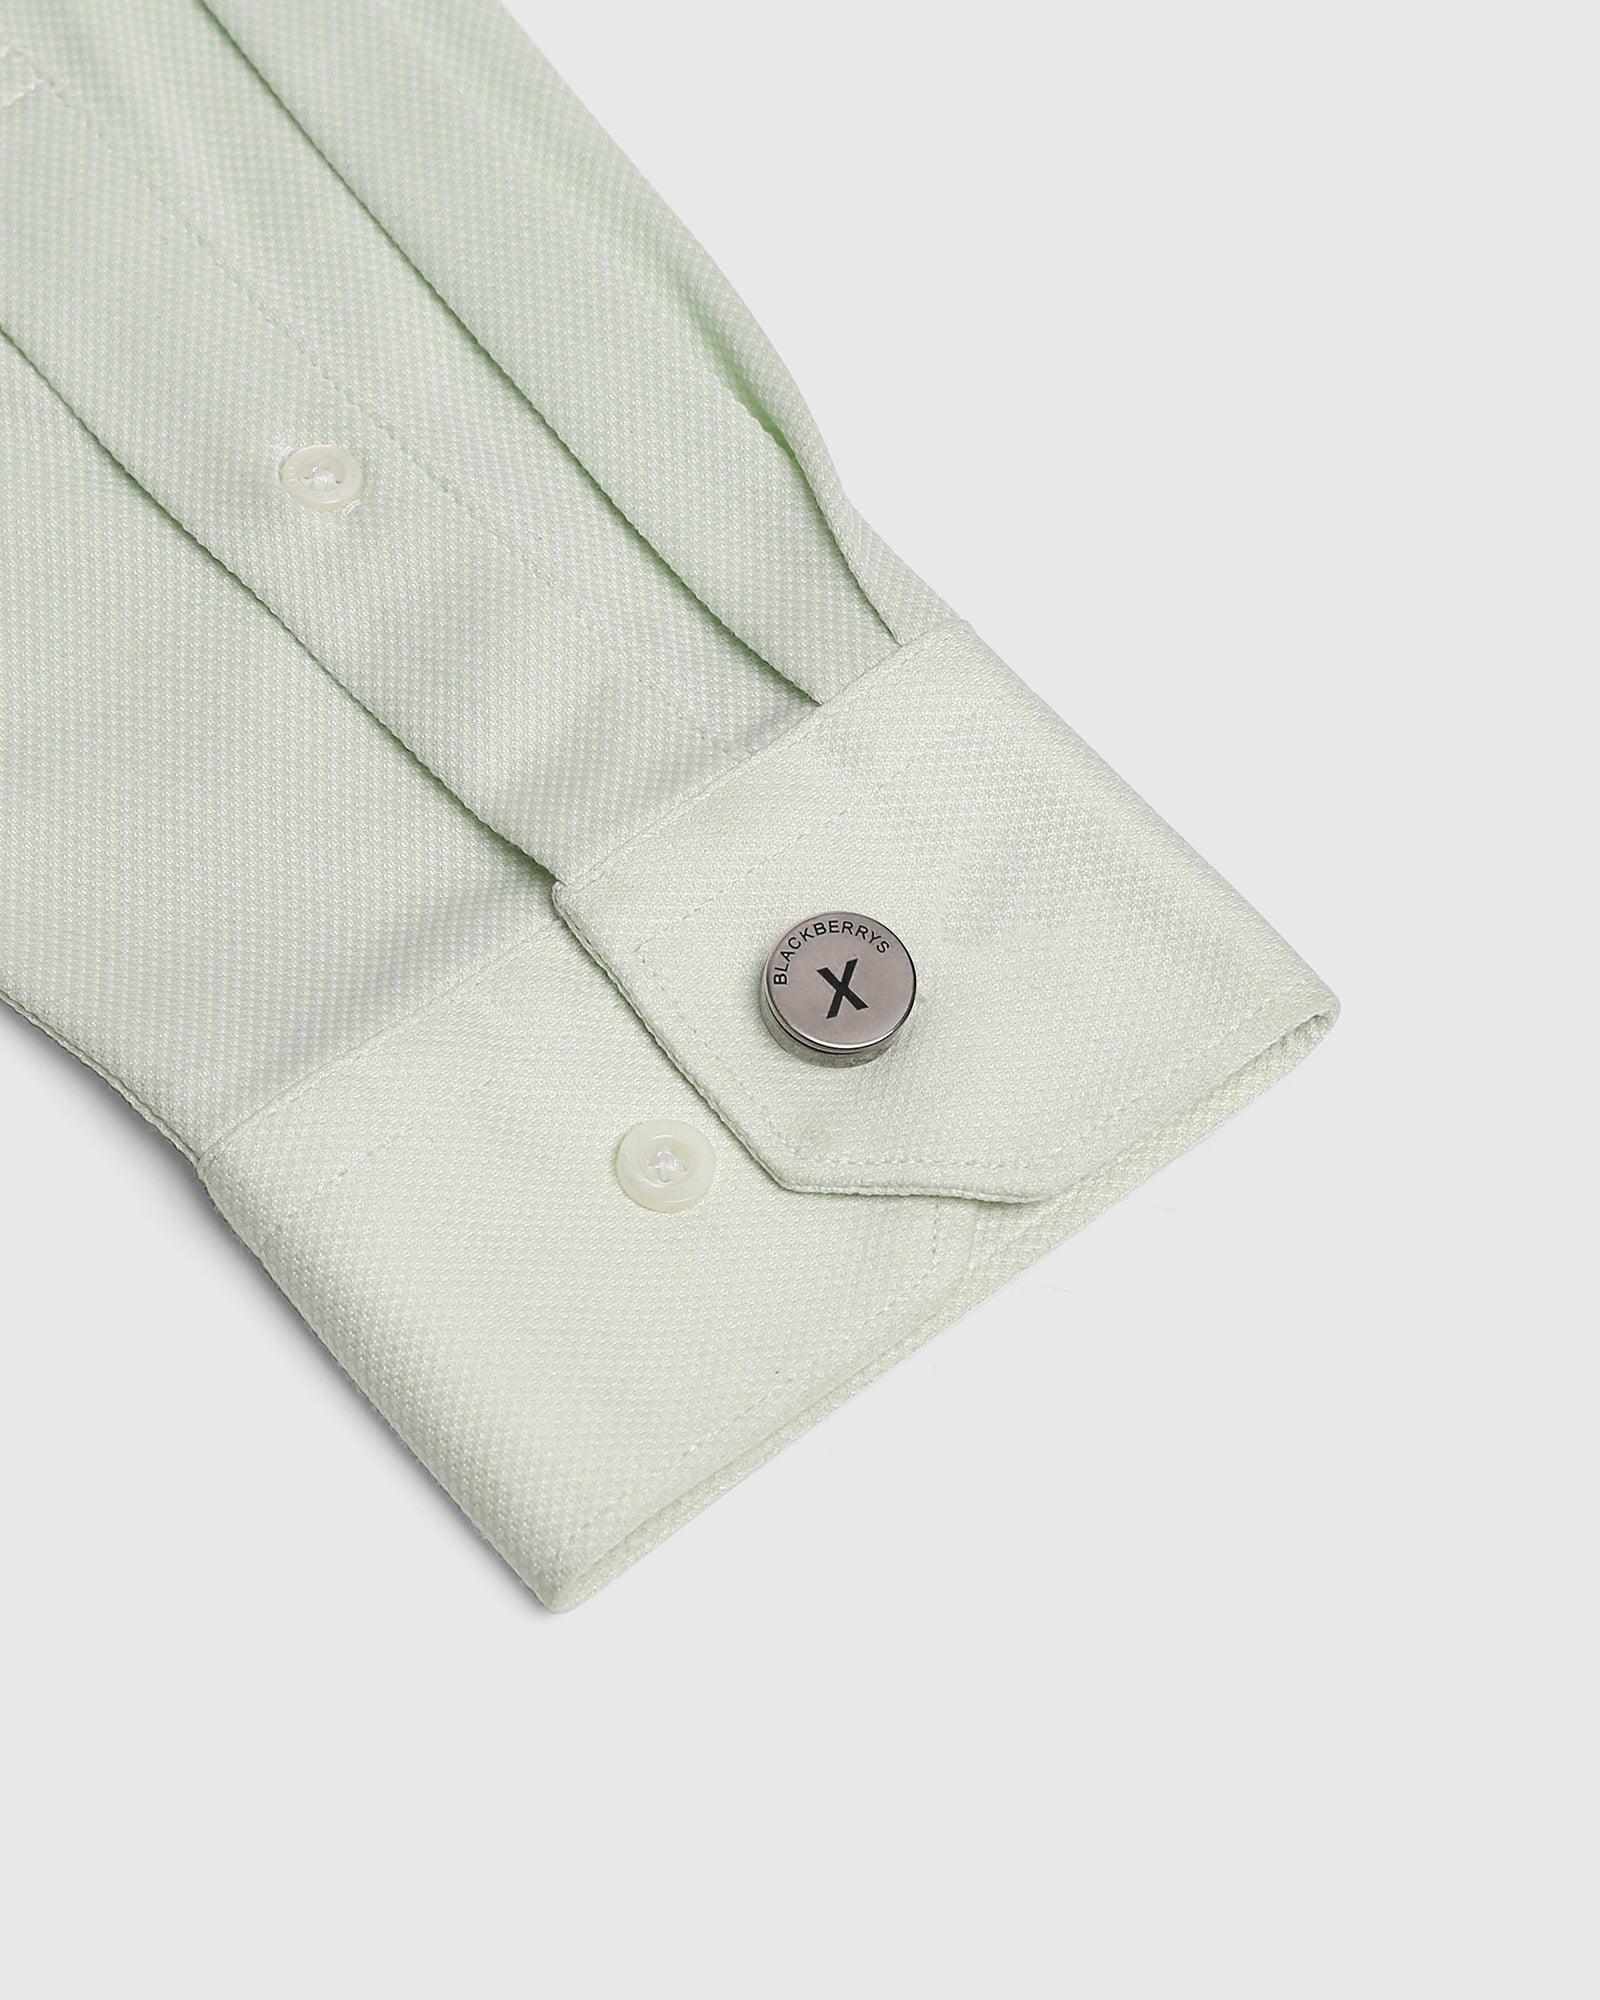 Personalised Shirt Button Cover With Alphabetic Initial-X